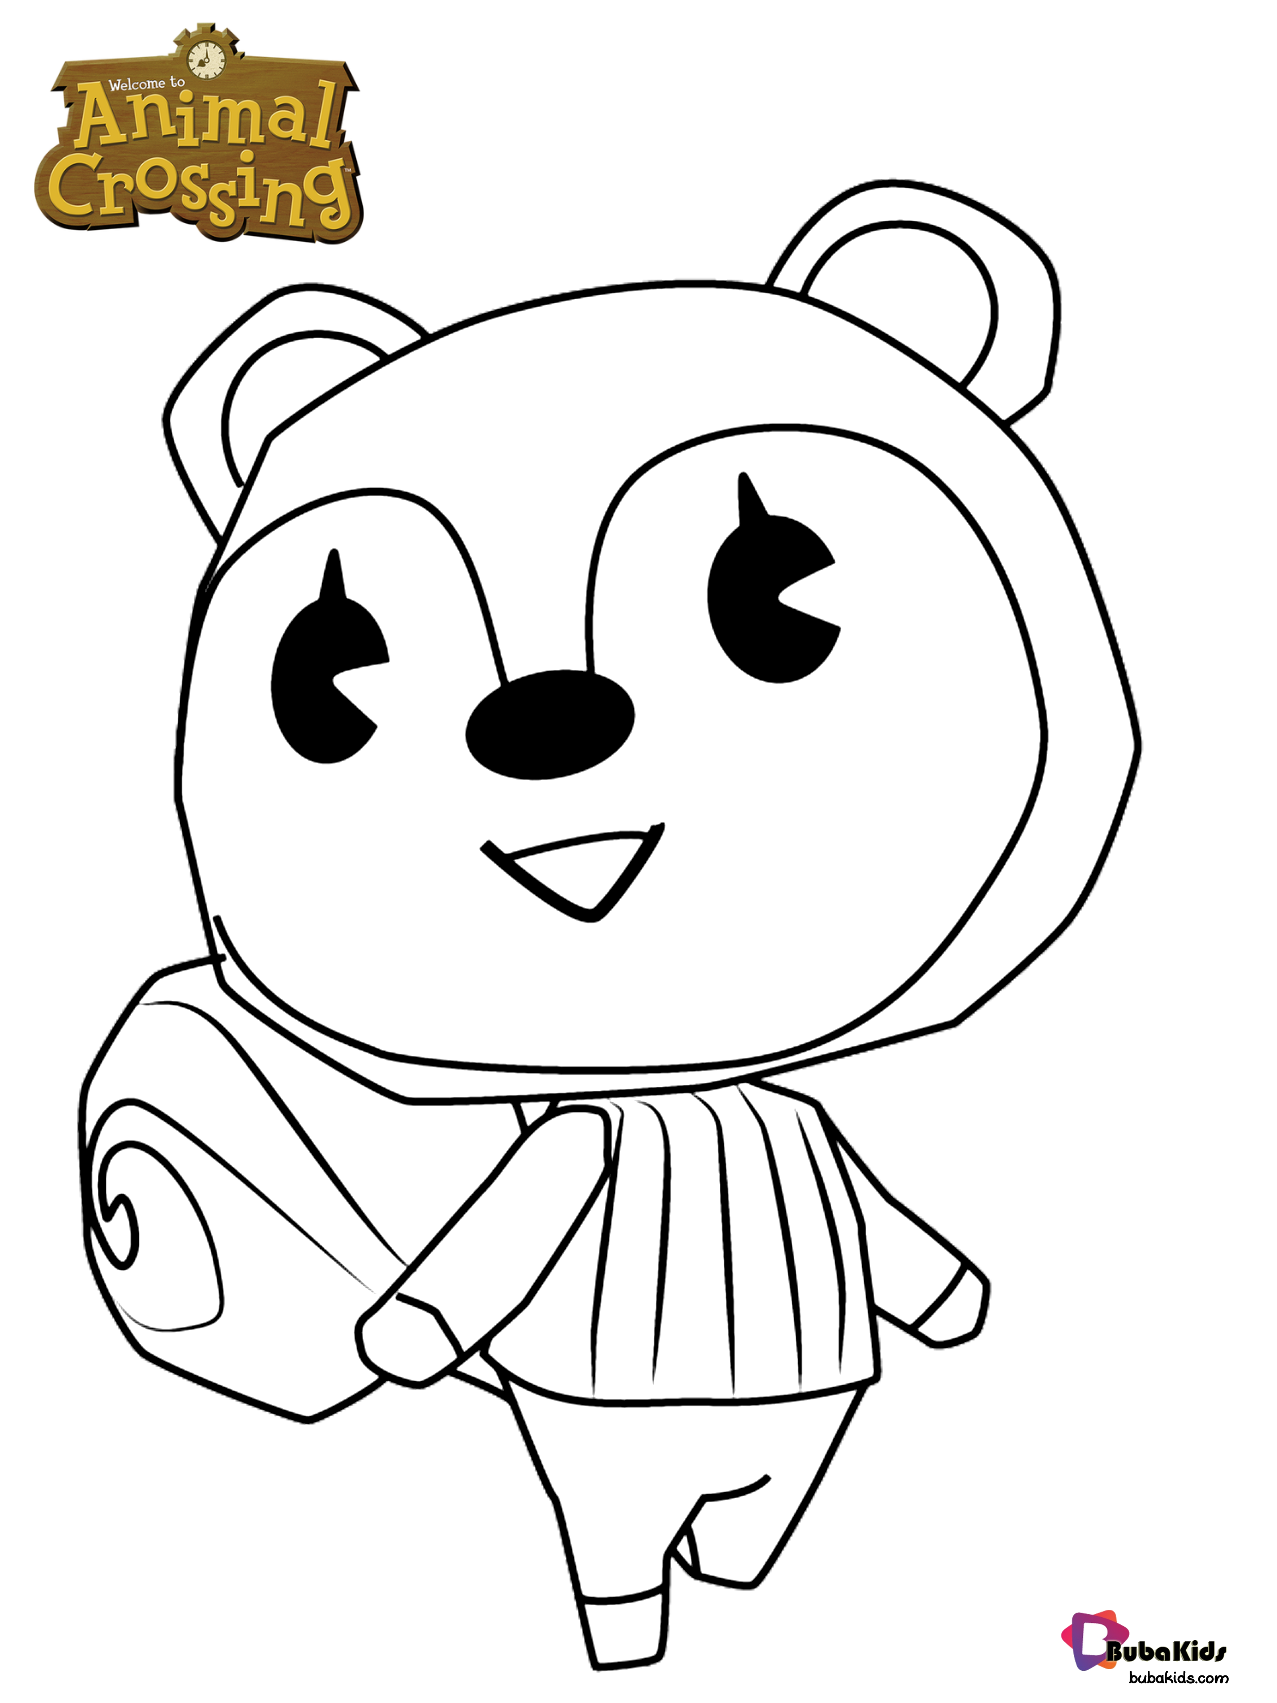 Free download and Printable Poppy Animal Crossing character coloring page Wallpaper